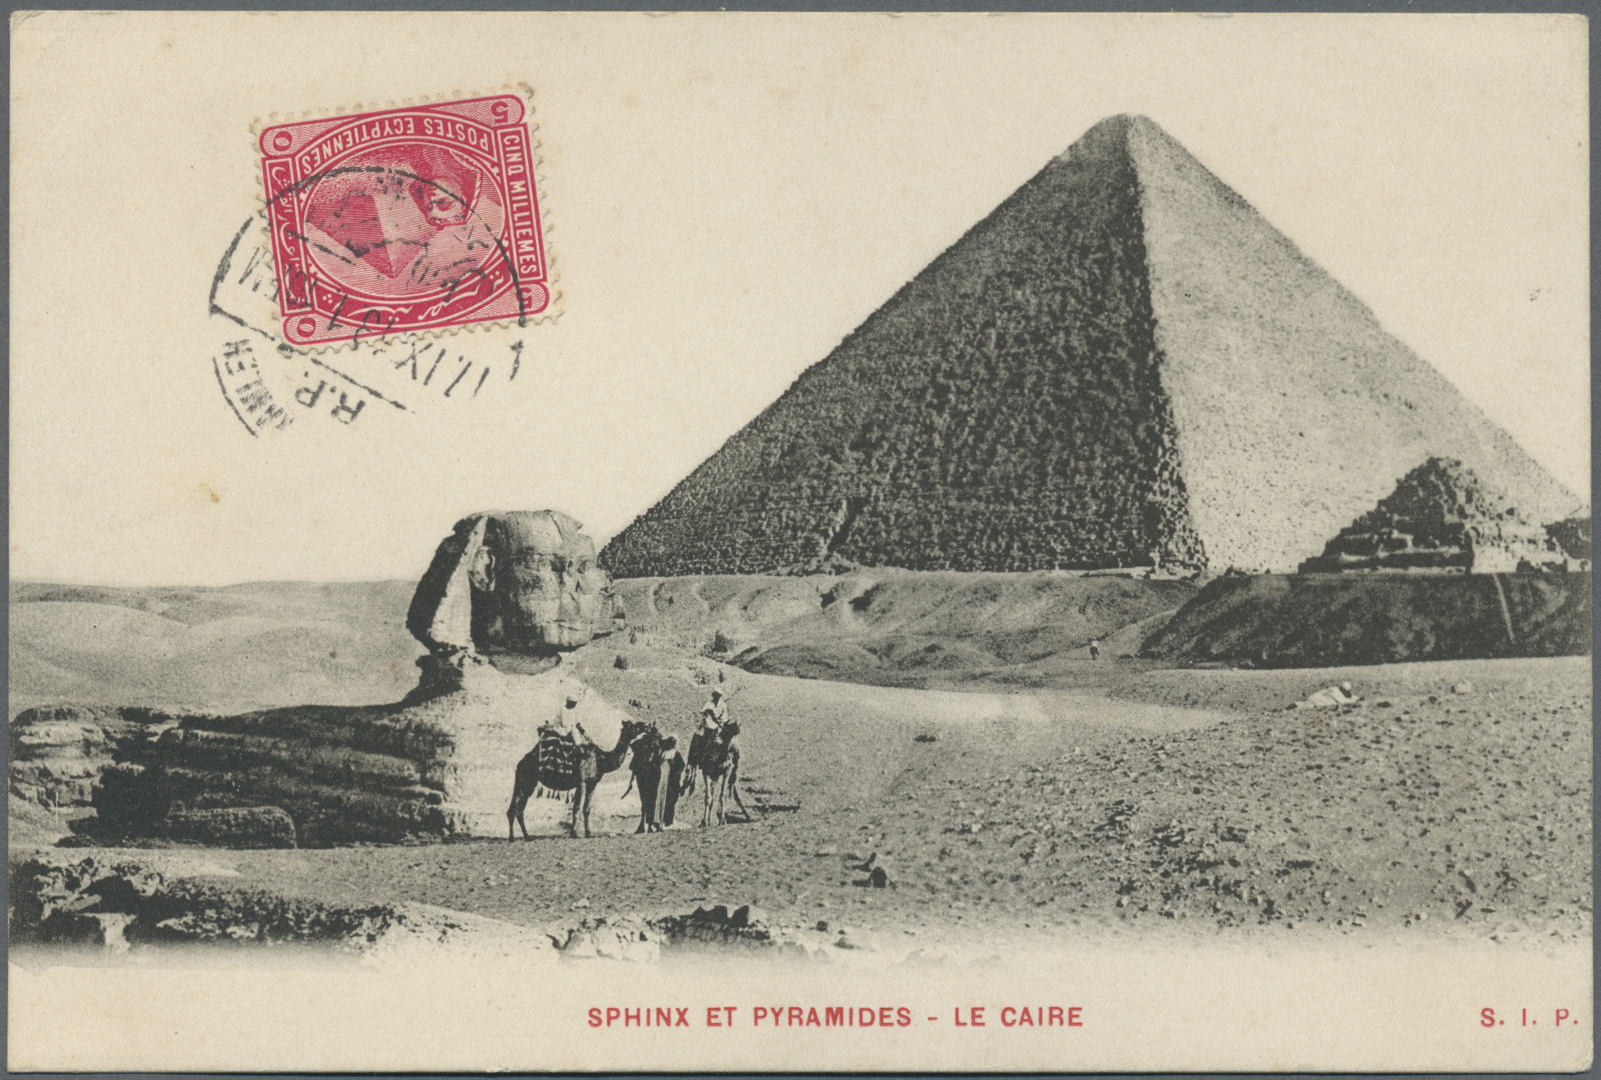 Br/ Ägypten: 1890's/1940's (c.) - PICTURE POSTCARDS: The fantastic, impressive and very comprehensive Ch